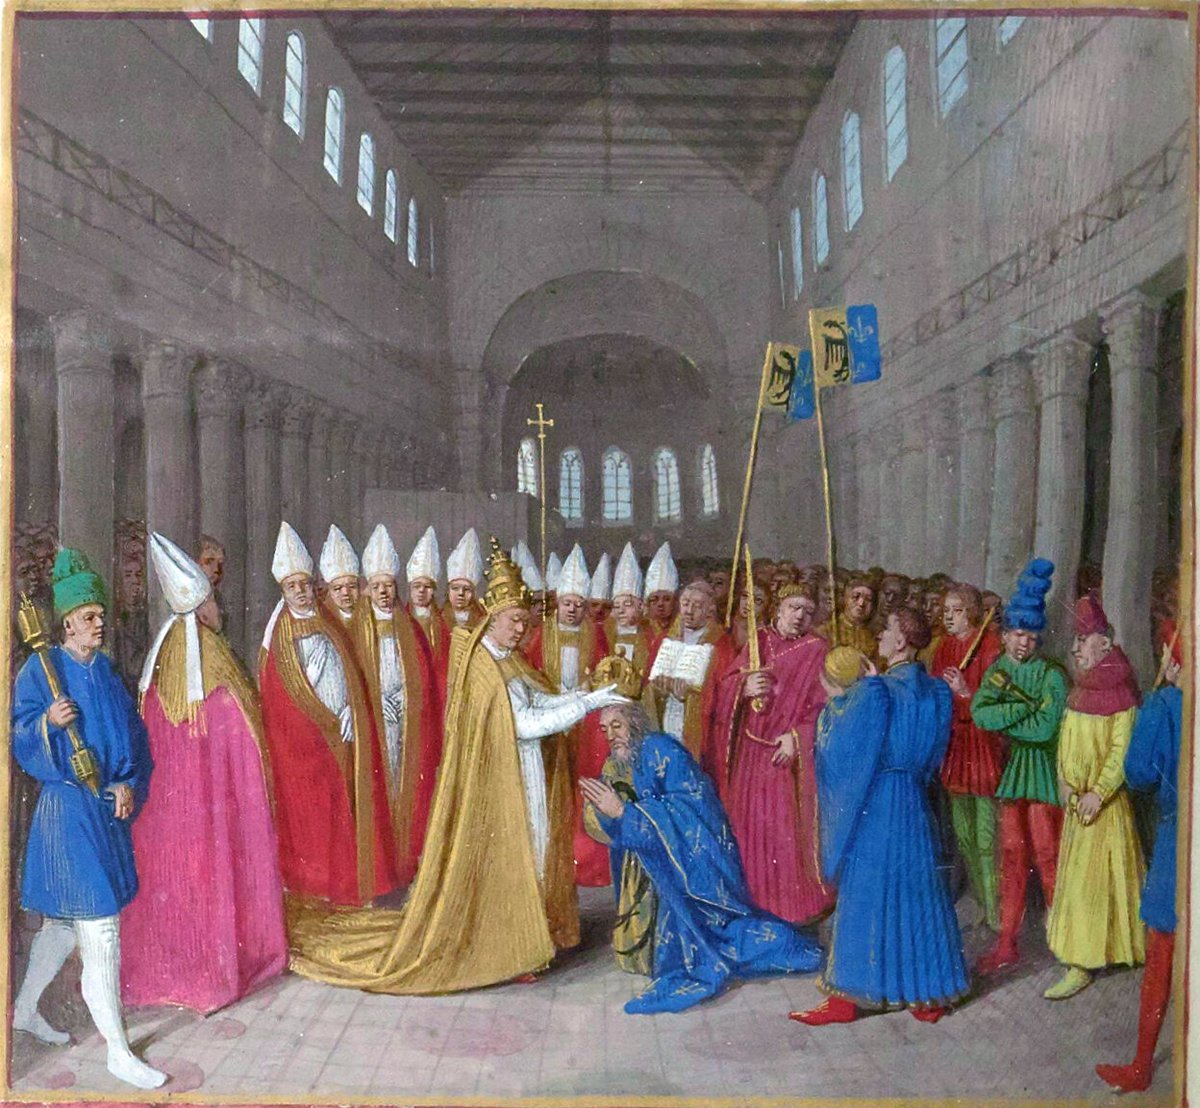 Why are the middle ages so vilified and demonized?It goes back to the origins of the tripartite division of history into ancient, medieval and new age.I explain how the middle ages got this weird name and why they became unjustly demonized by modern people.THREAD